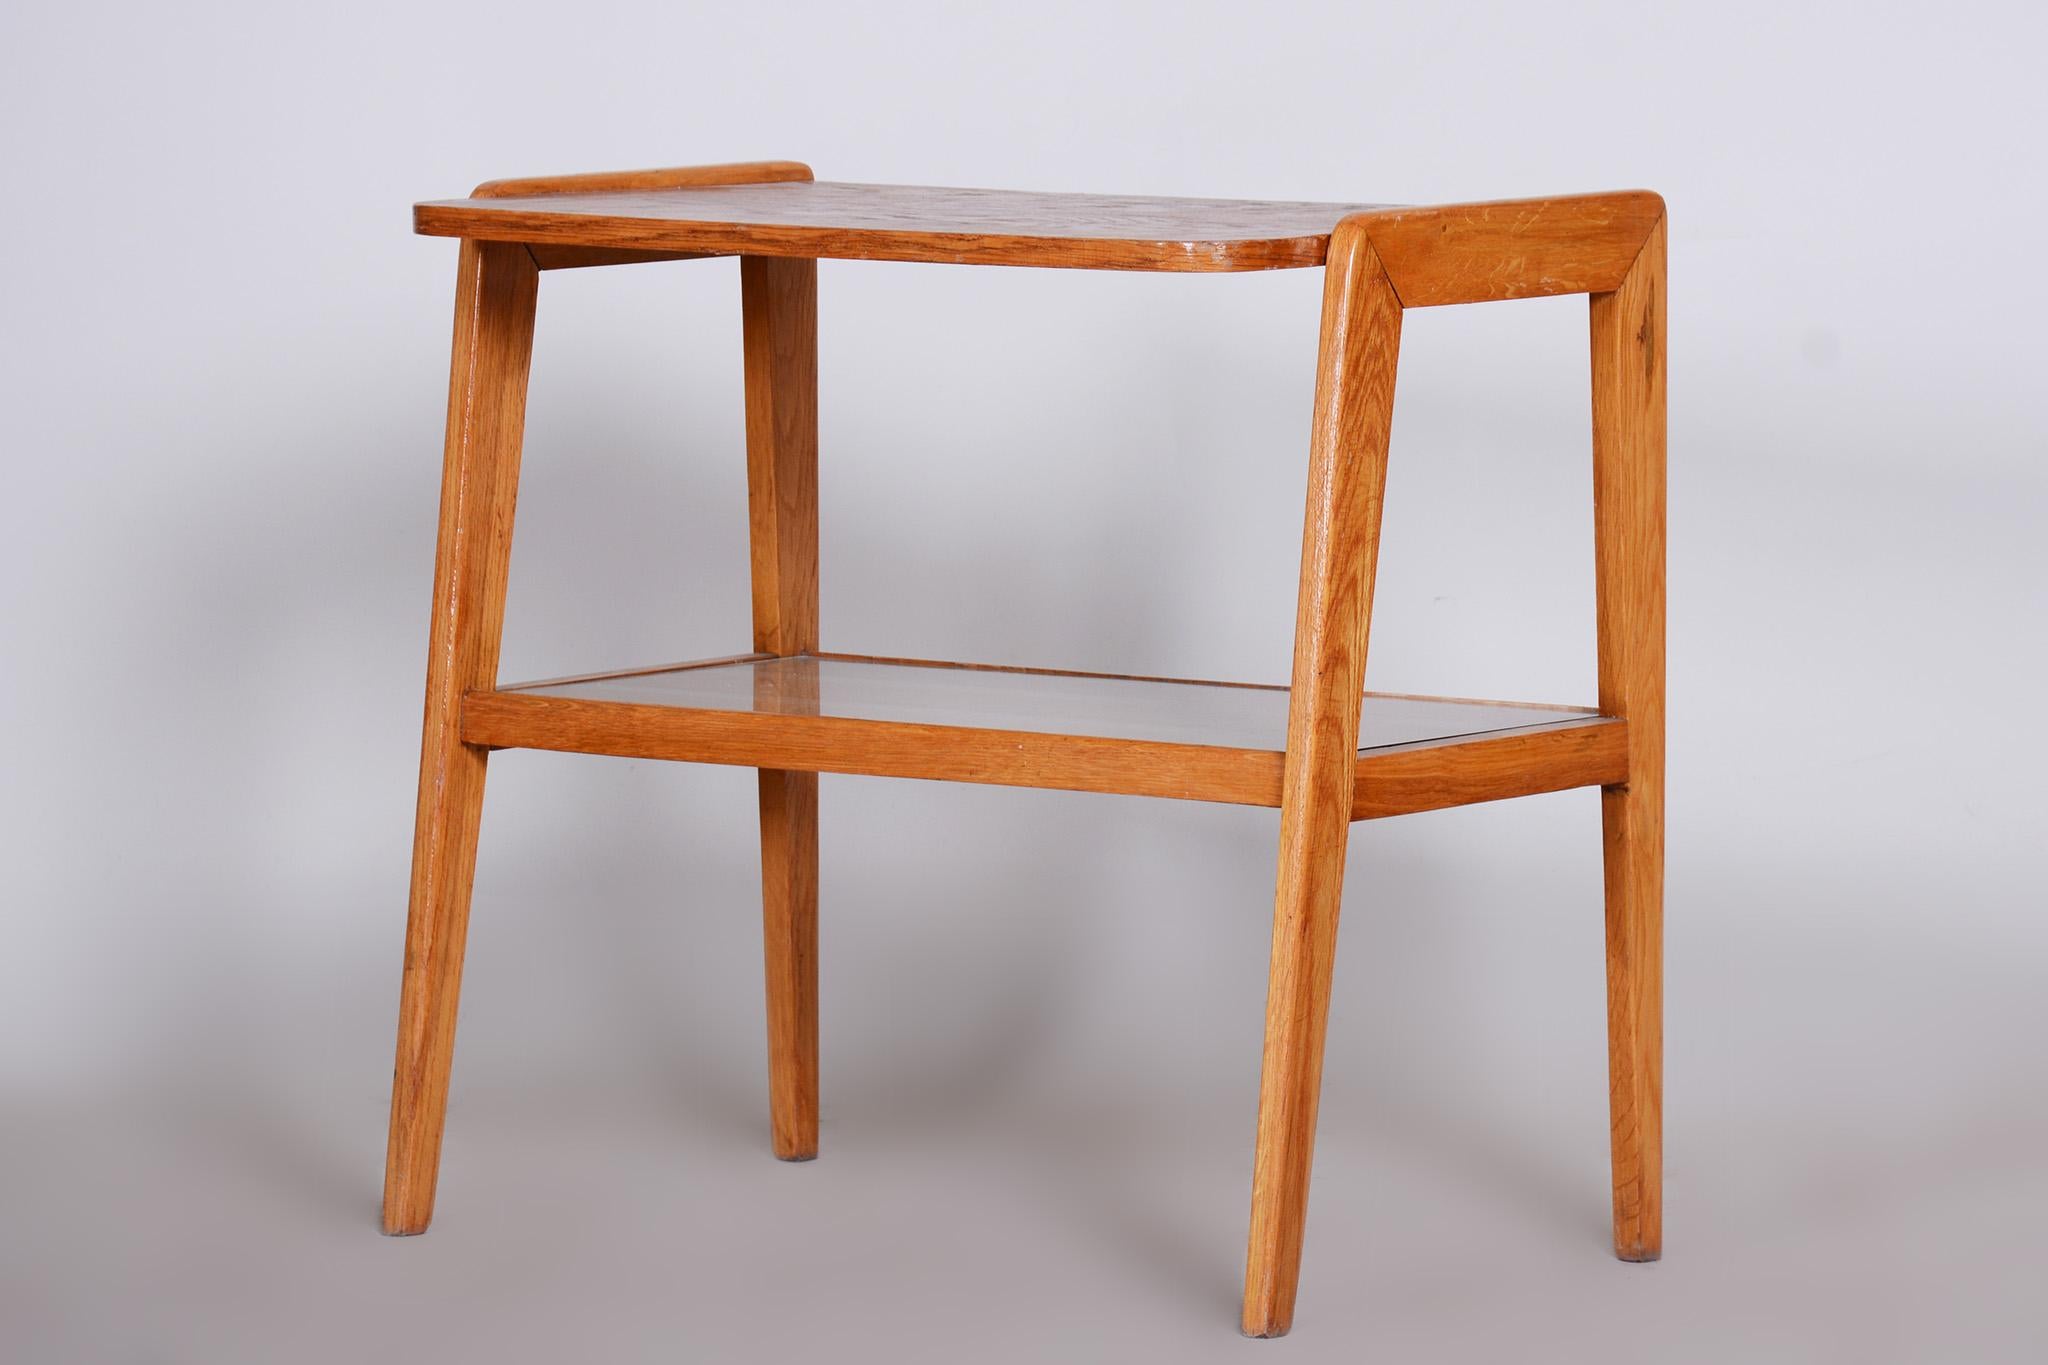 Wood Restored Bauhaus Console Table, Oak and Glass, Refreshed Polish, Czechia, 1950s For Sale